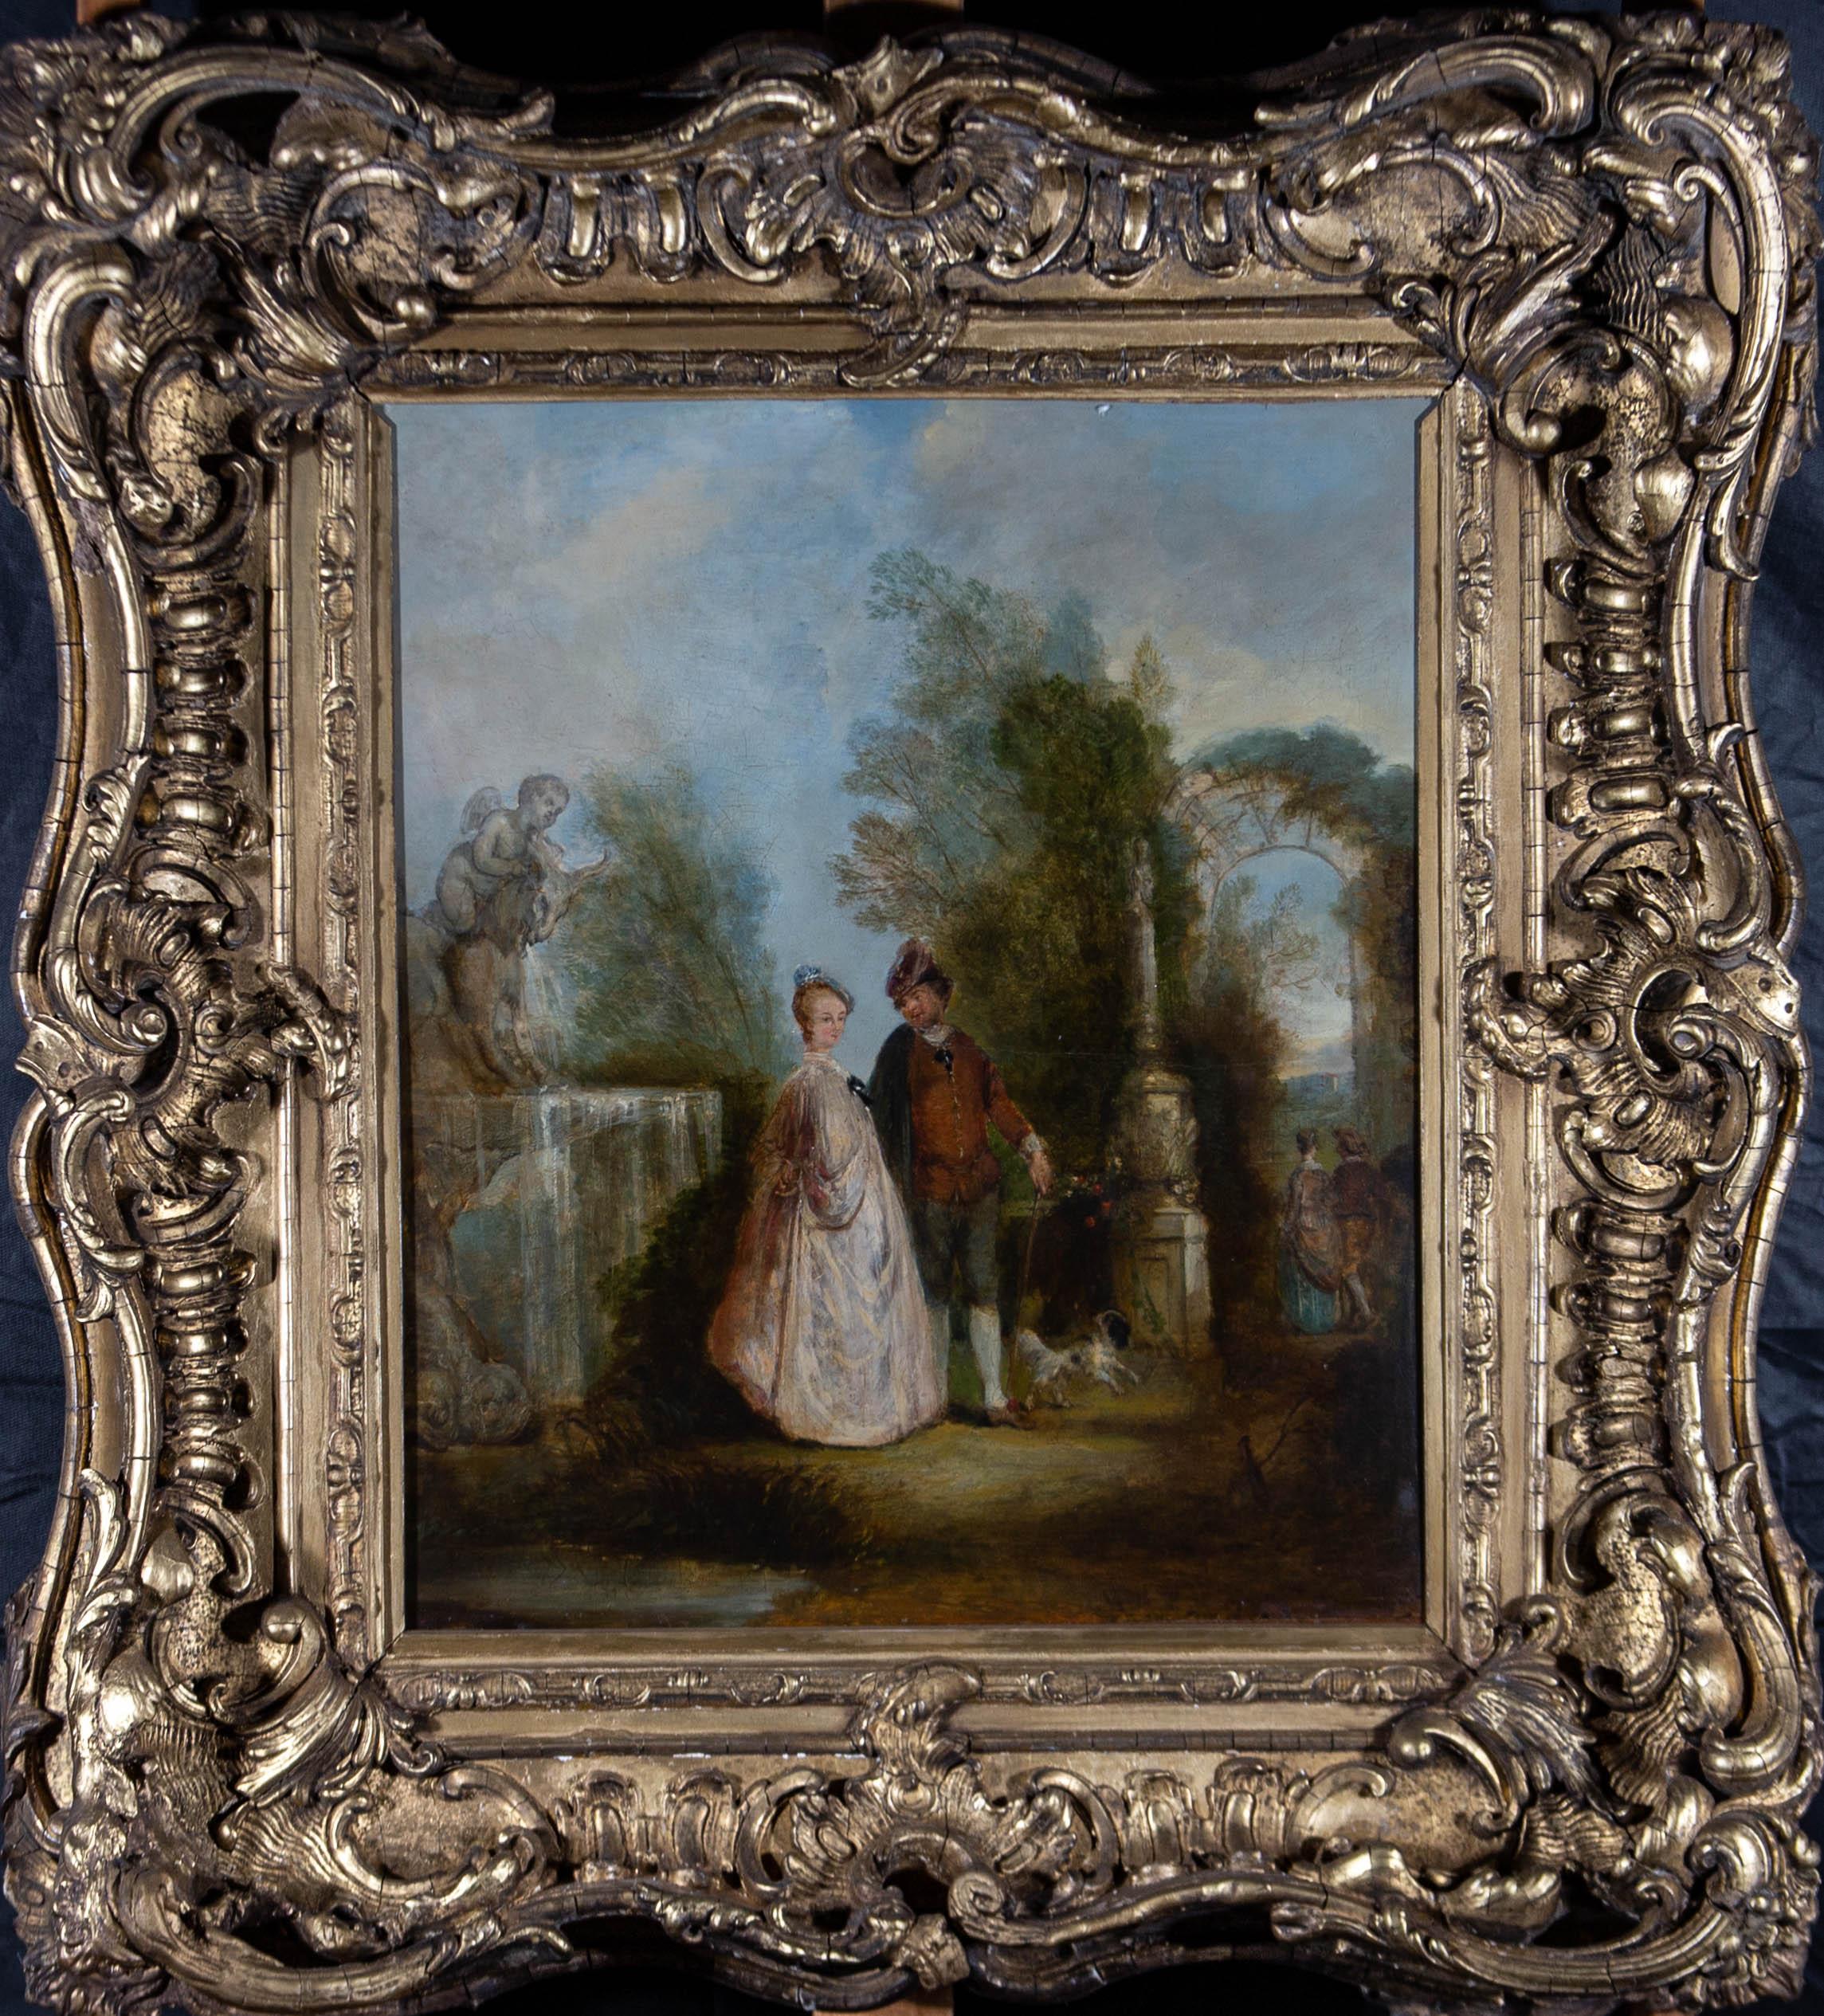 We are thrilled to have acquired this fine mid 19th Century oil, attributed to the genre scene painter Henry Adams (1794-1868). The scene shows an elegantly dressed couple, the woman in a flowing white dress and the man in britches and a rust